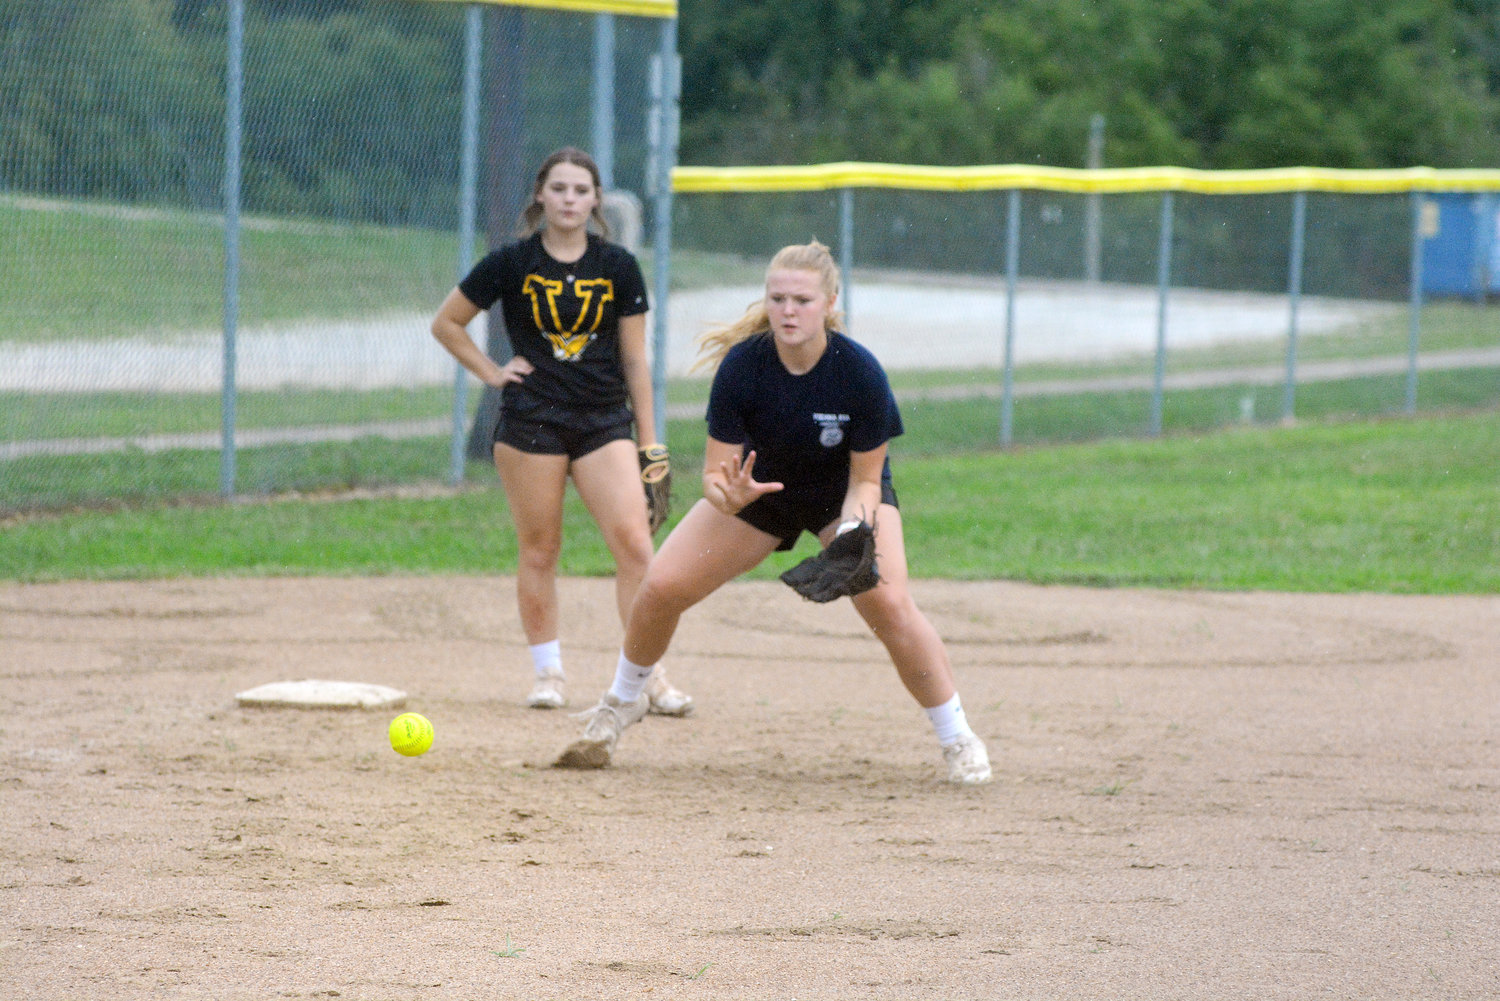 Ava Kloeppel (right) positions herself to field a ground ball at third base during a recent practice session for Vienna’s Lady Eagles on their home softball field at Vienna City Park.